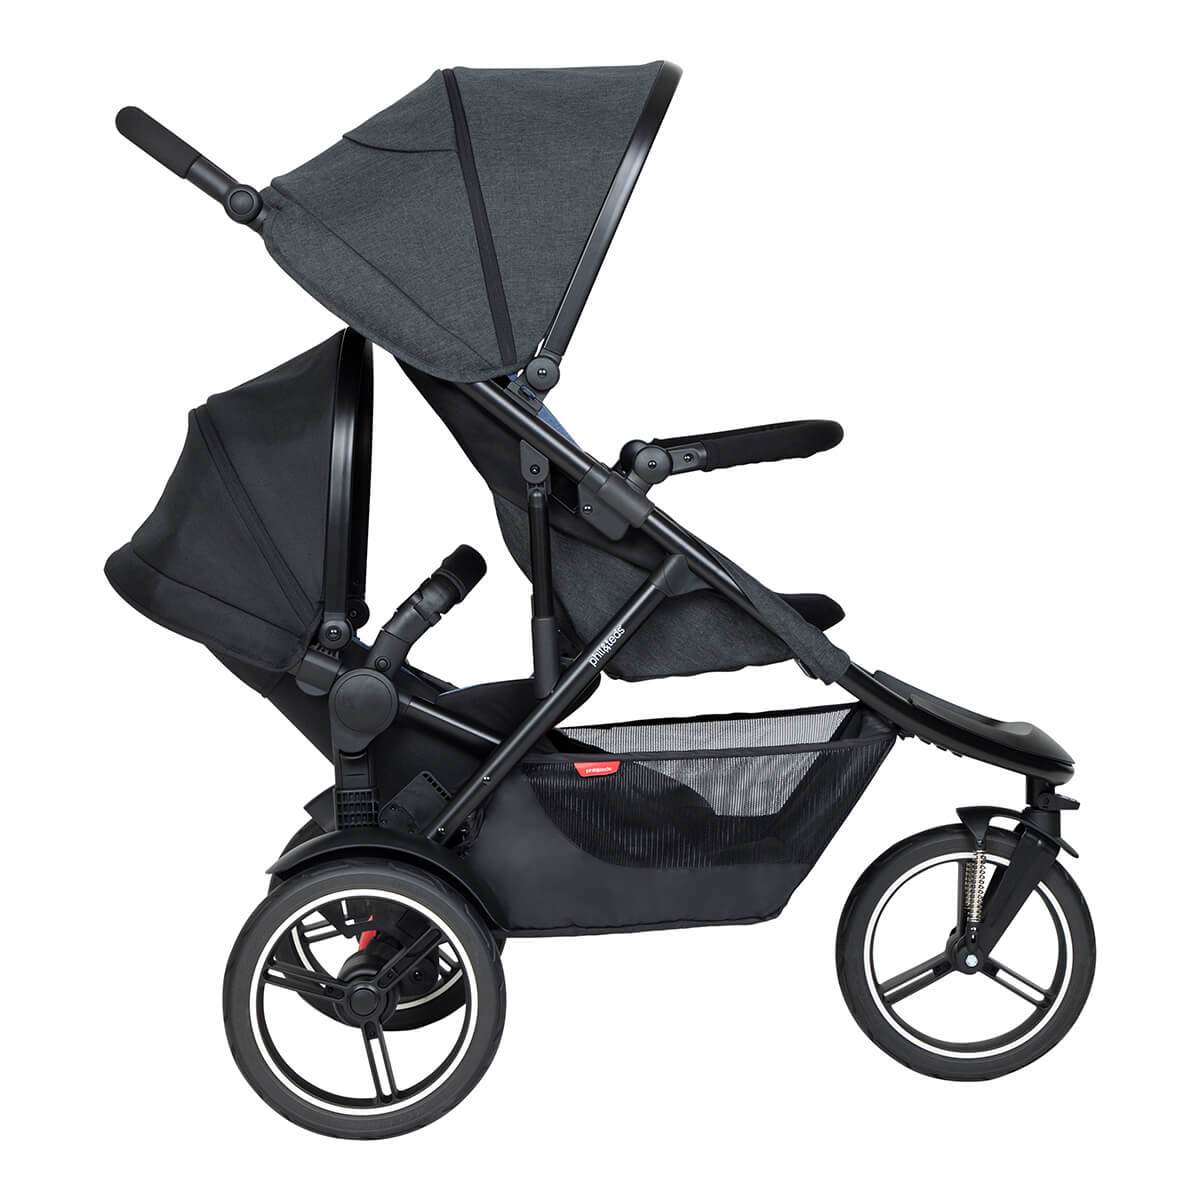 pram with toddler front seat and double kit second seat at rear